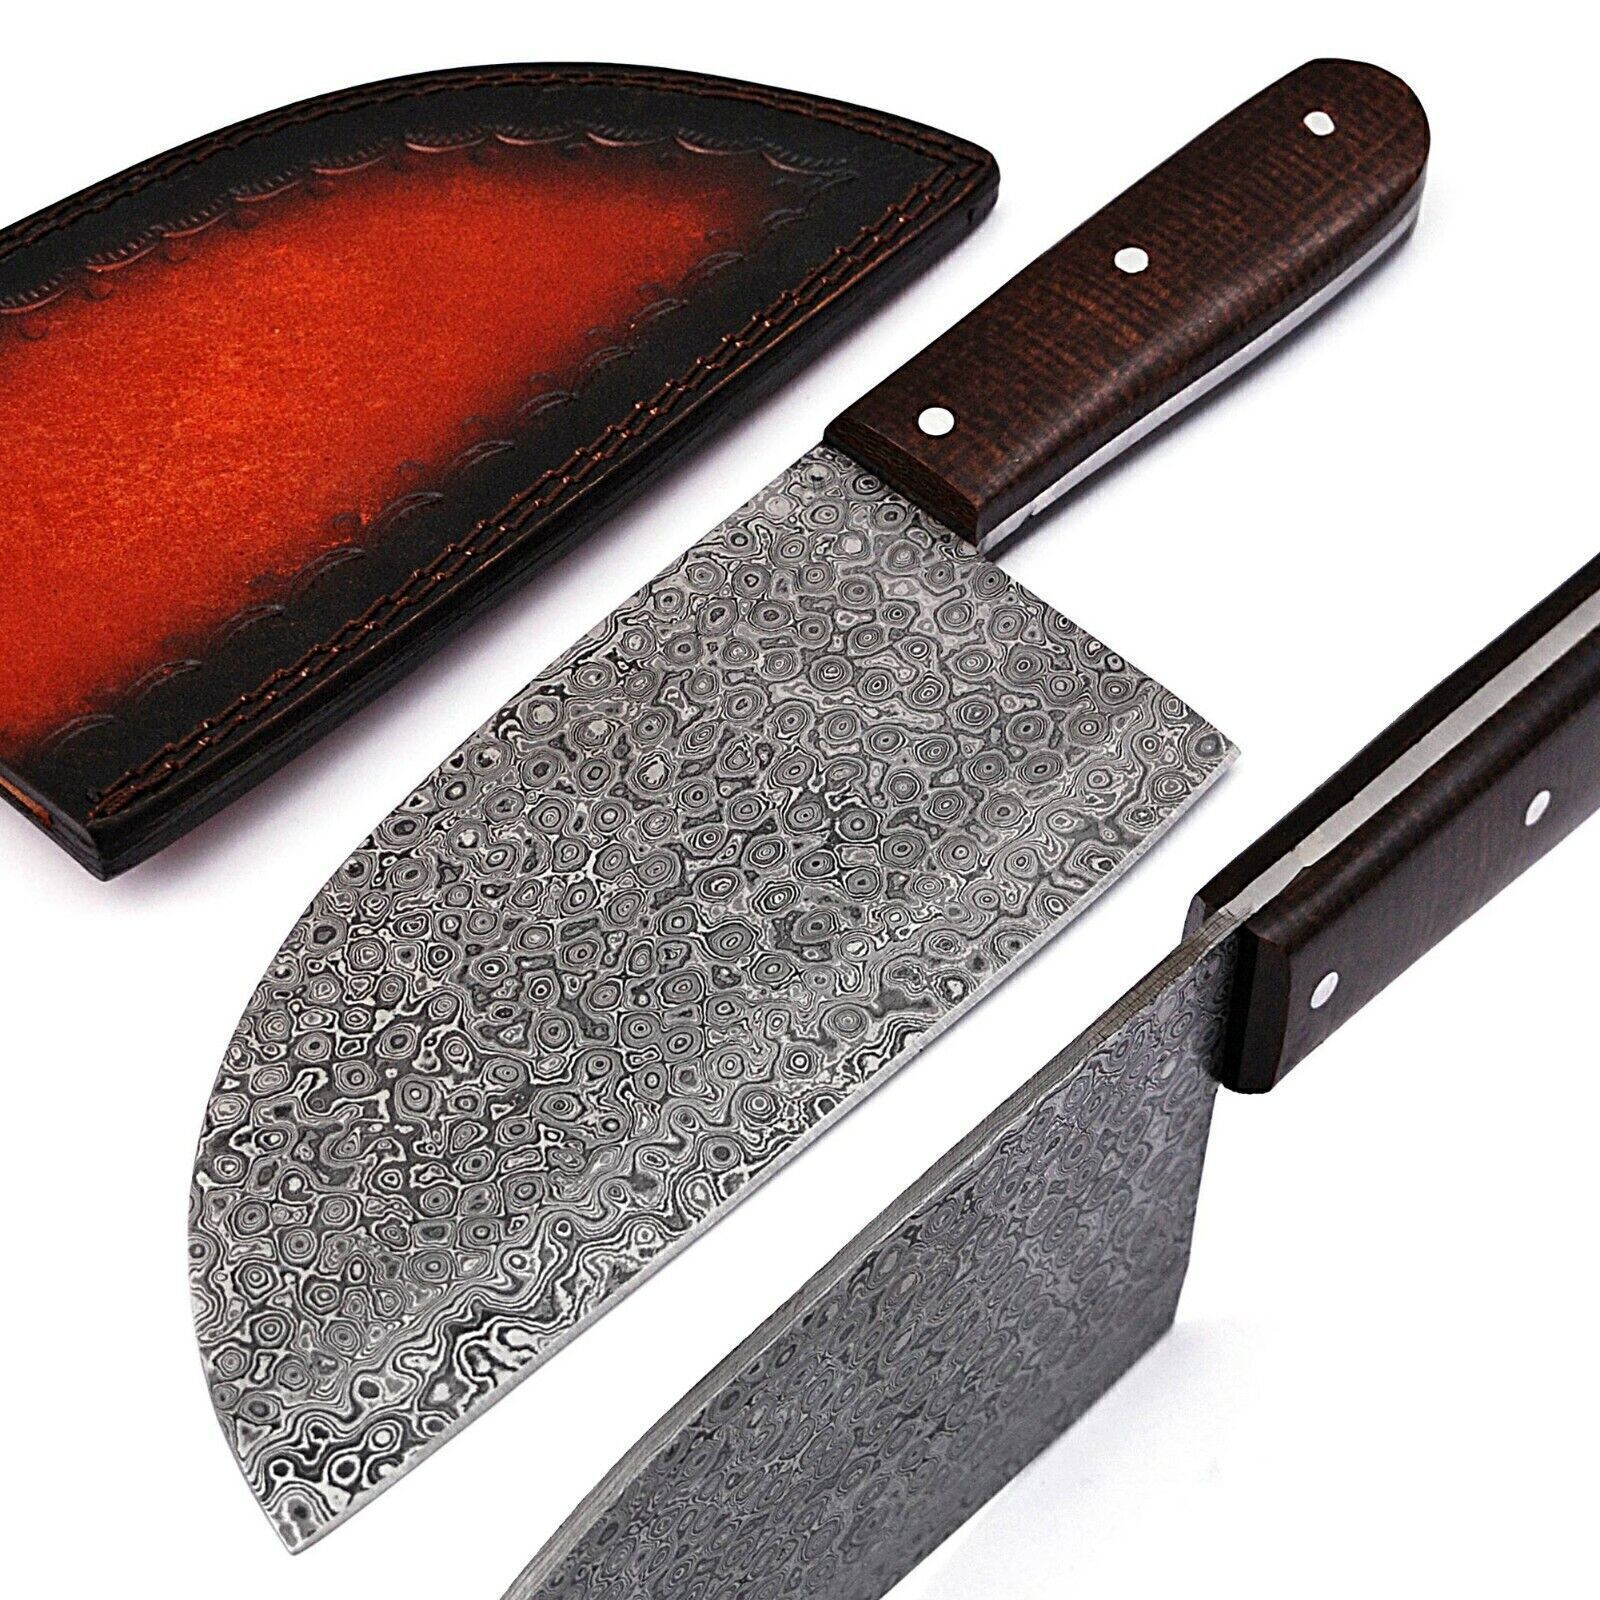 11.5 Inch Cleaver Knife, Hand-Forged Full Tang Damascus Steel Butcher Knife